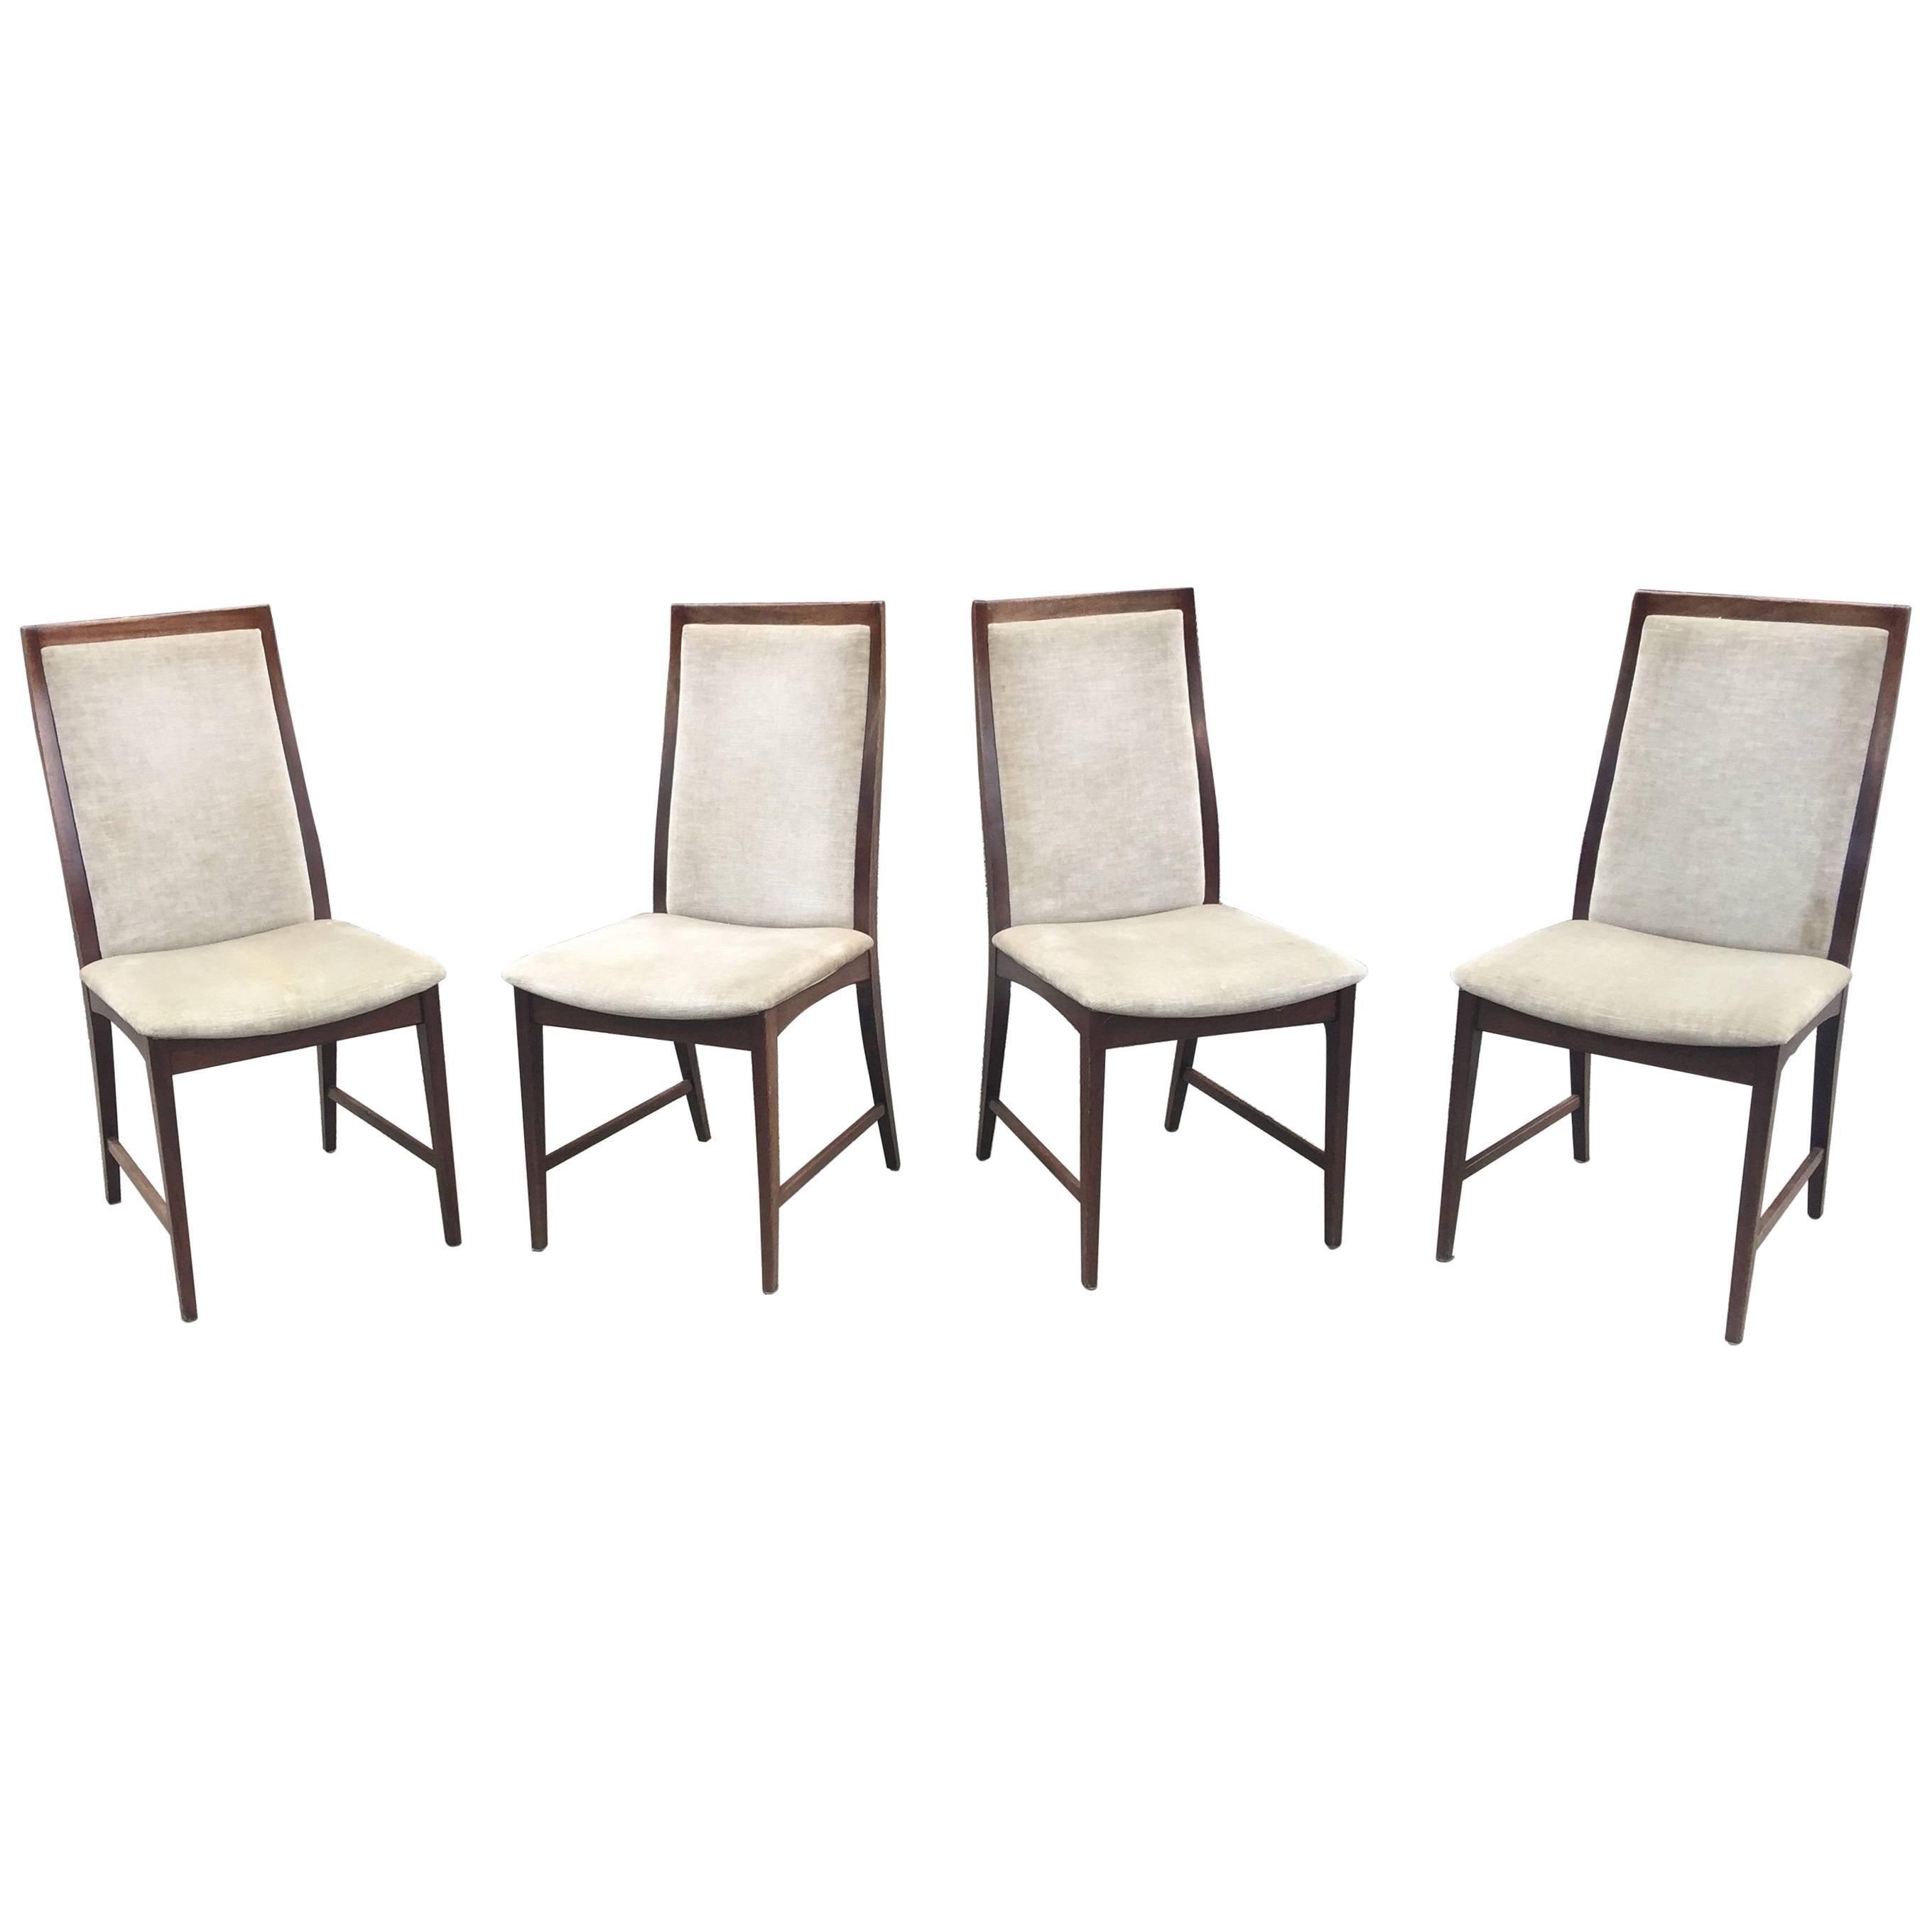 Set of Four 1960s Chairs in Mahogany and Velvet